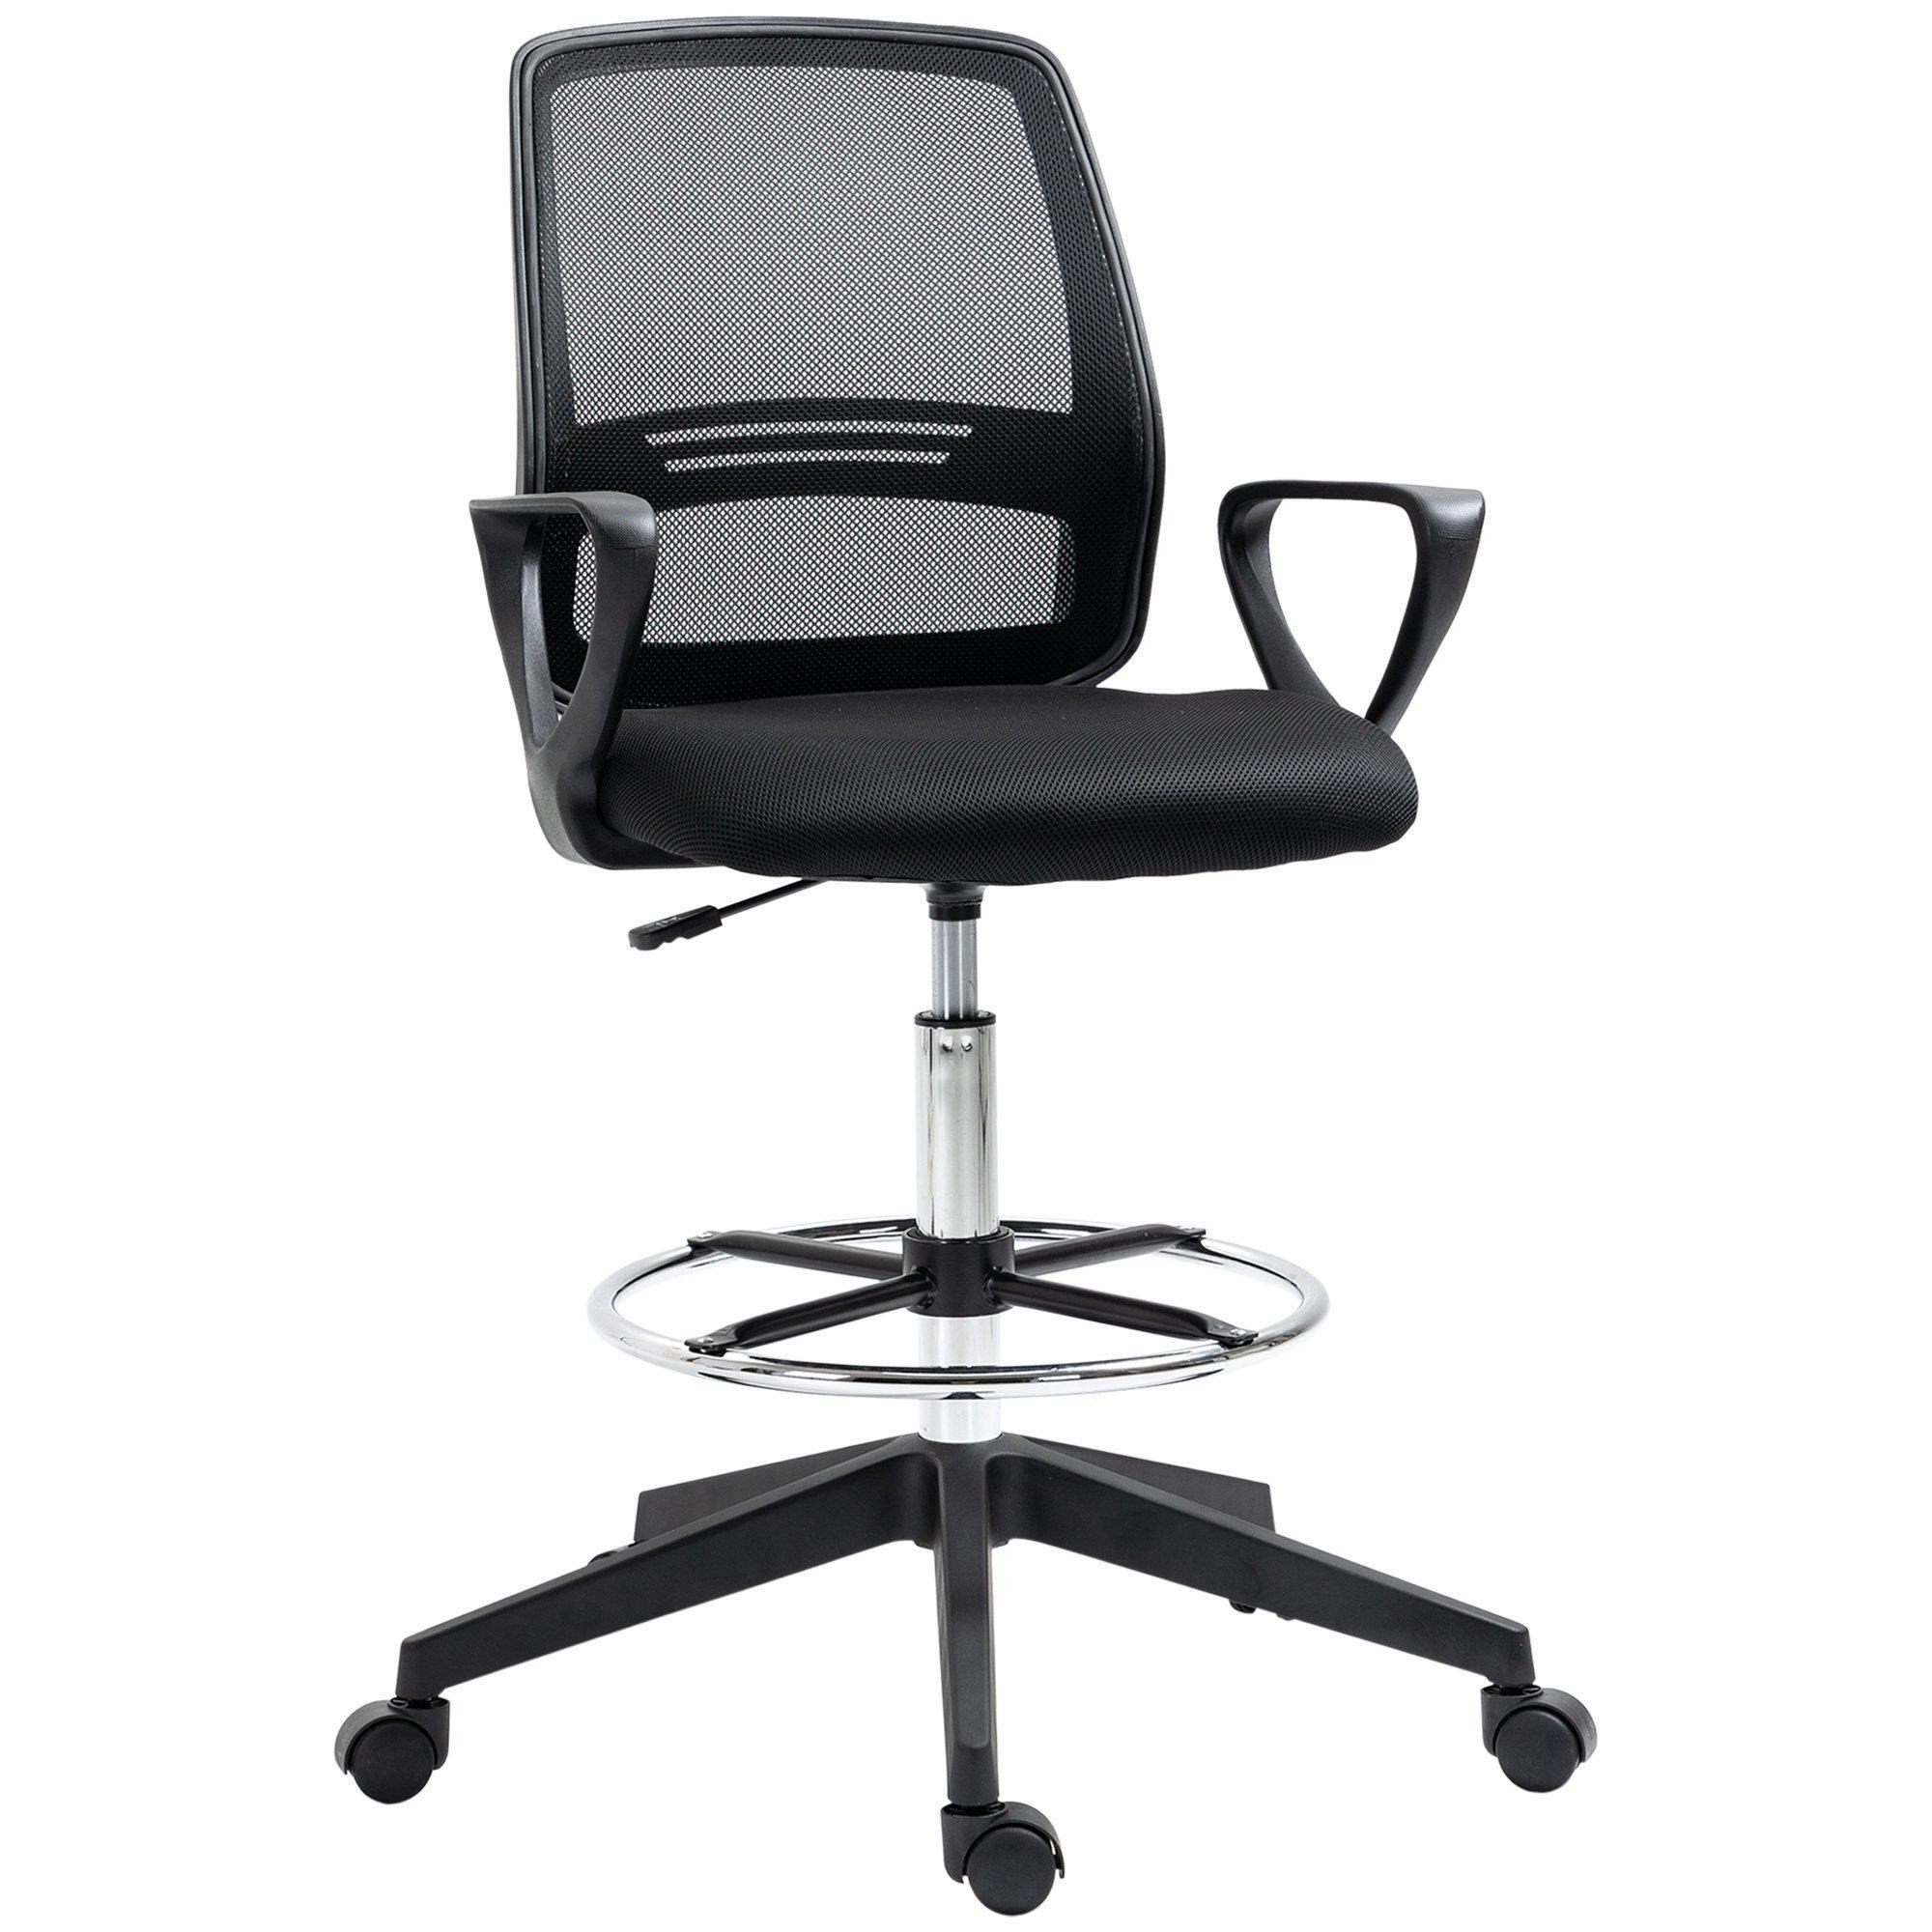 Draughtsman Chair Tall Office Chair with Adjustable Height - image 1